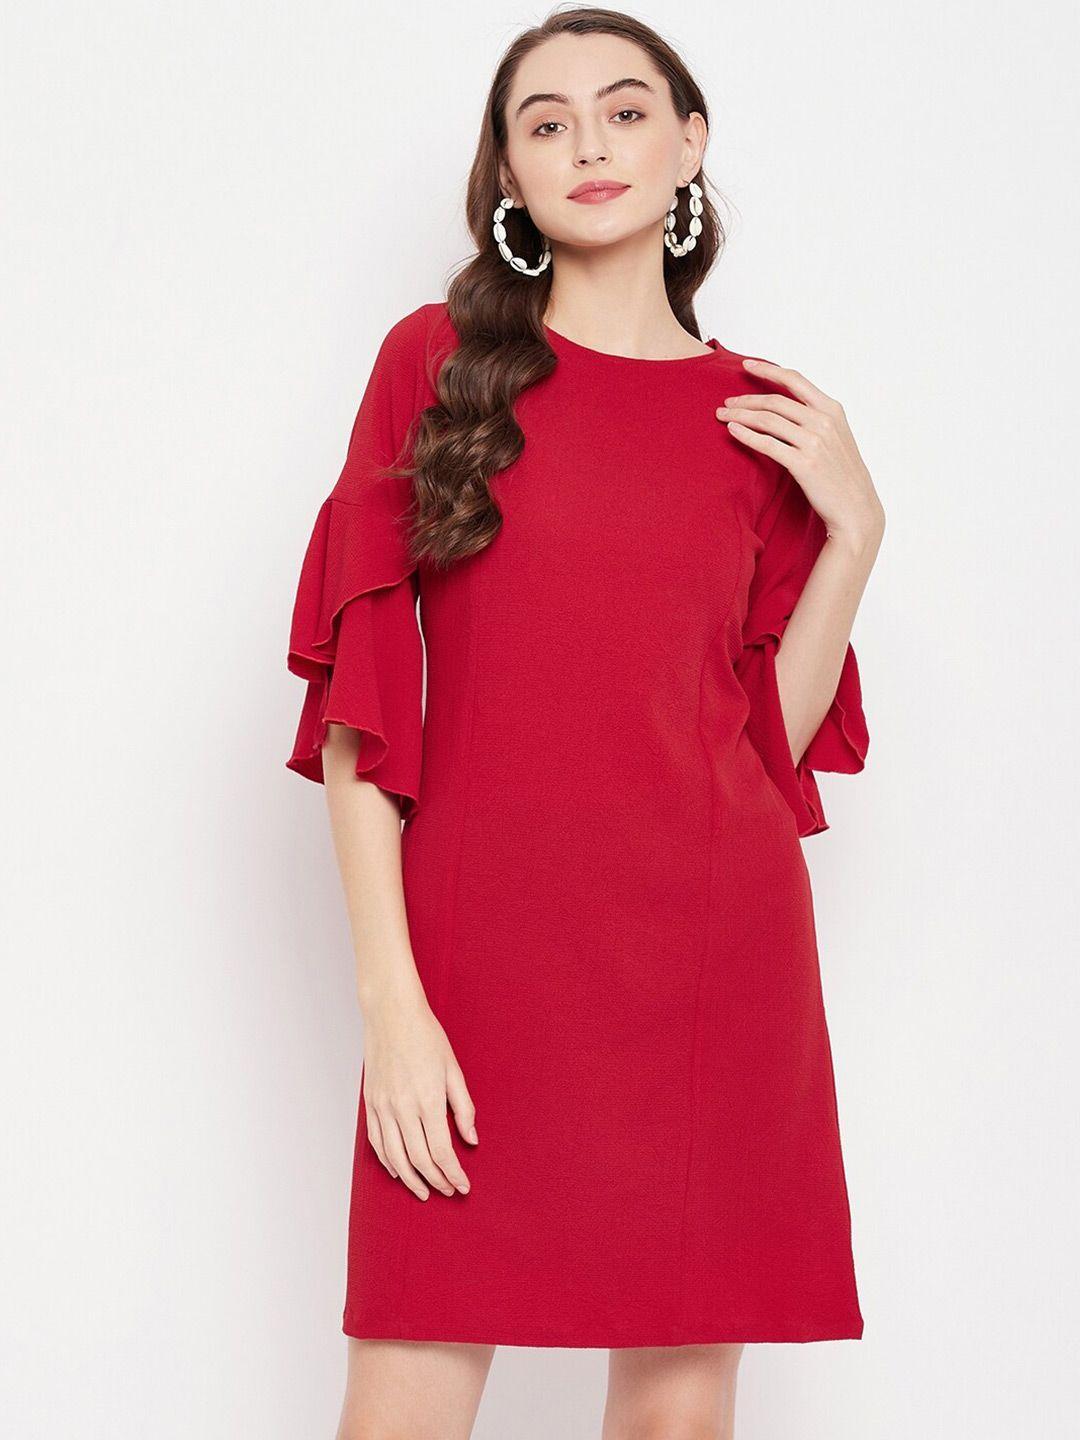 style blush bell sleeves a line dress